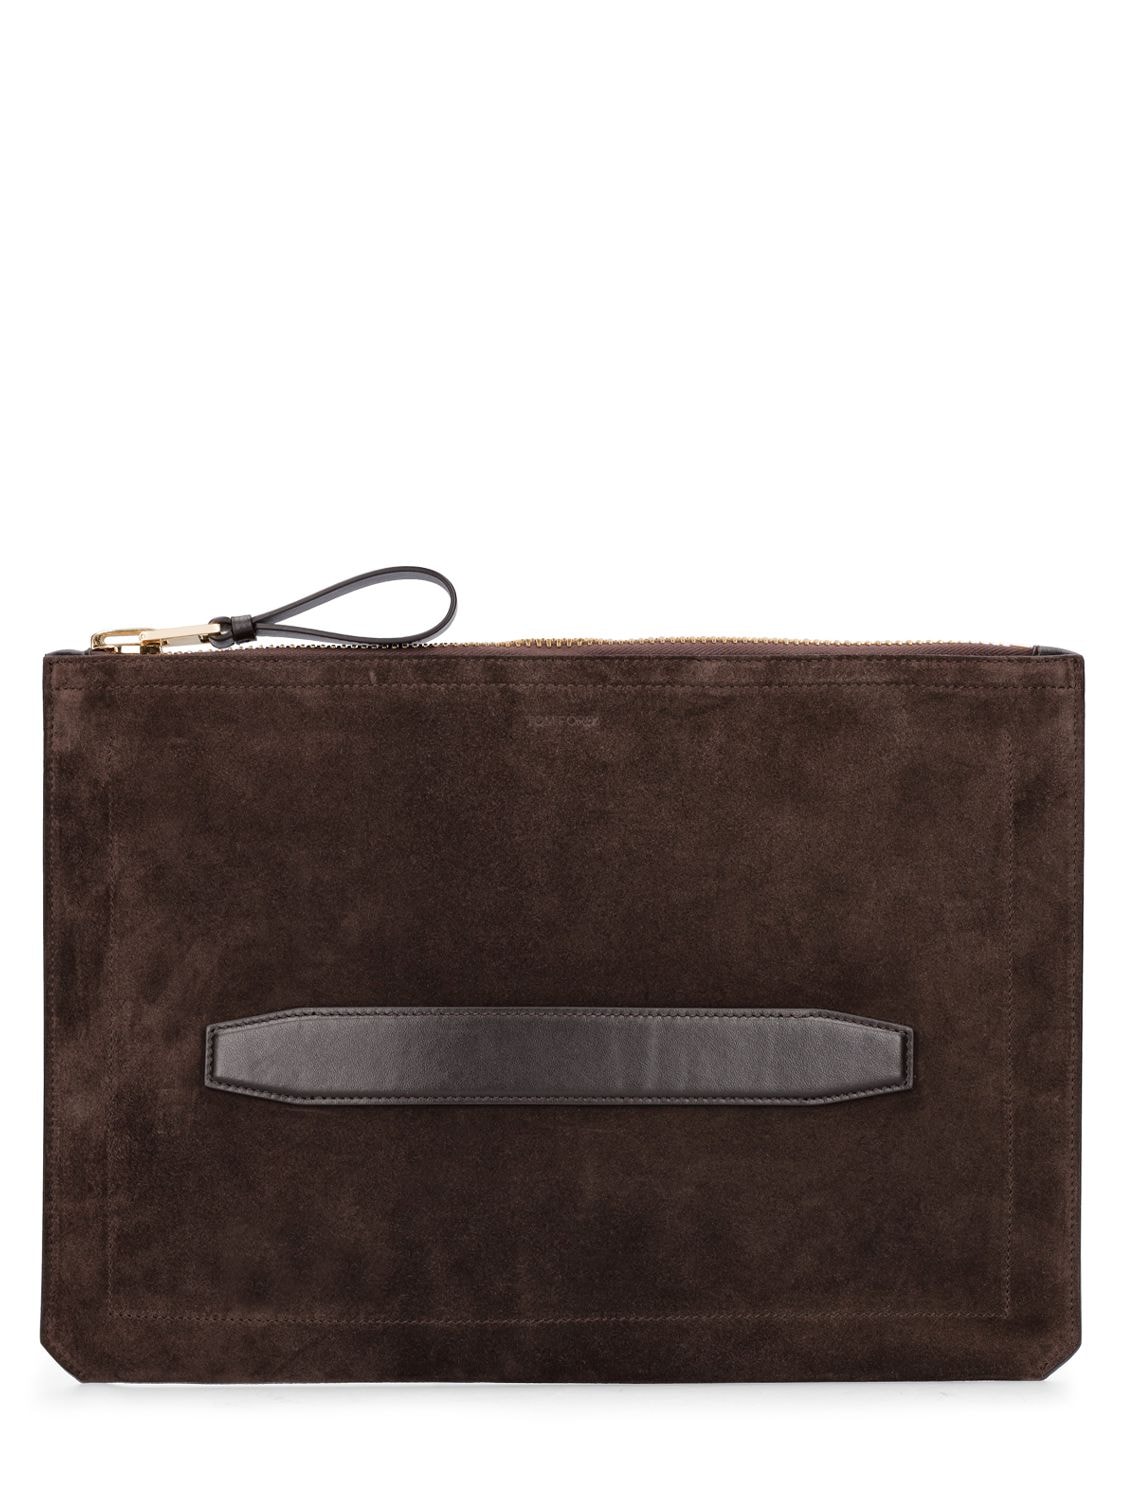 Tom Ford Buckley Suede & Leather Handle Portfolio In Brown